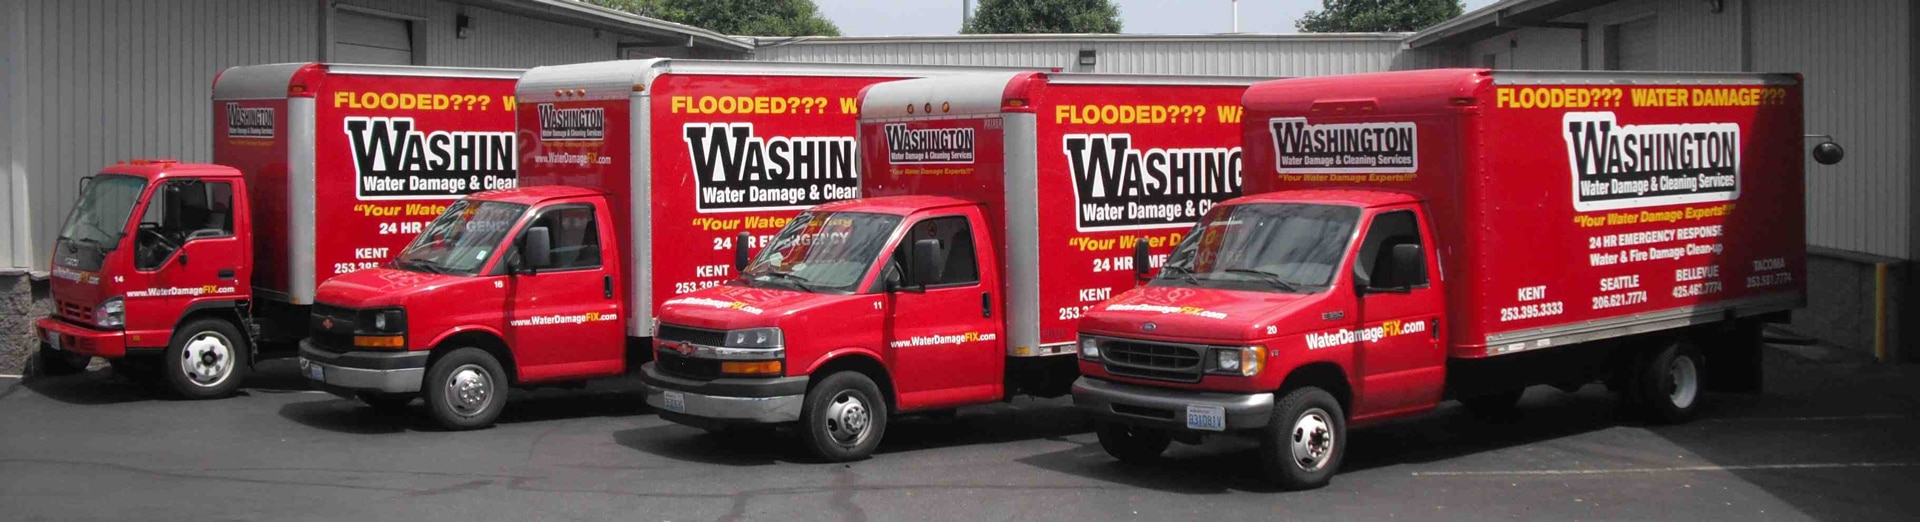 Washington Water Damage and Cleaning Services Work Trucks